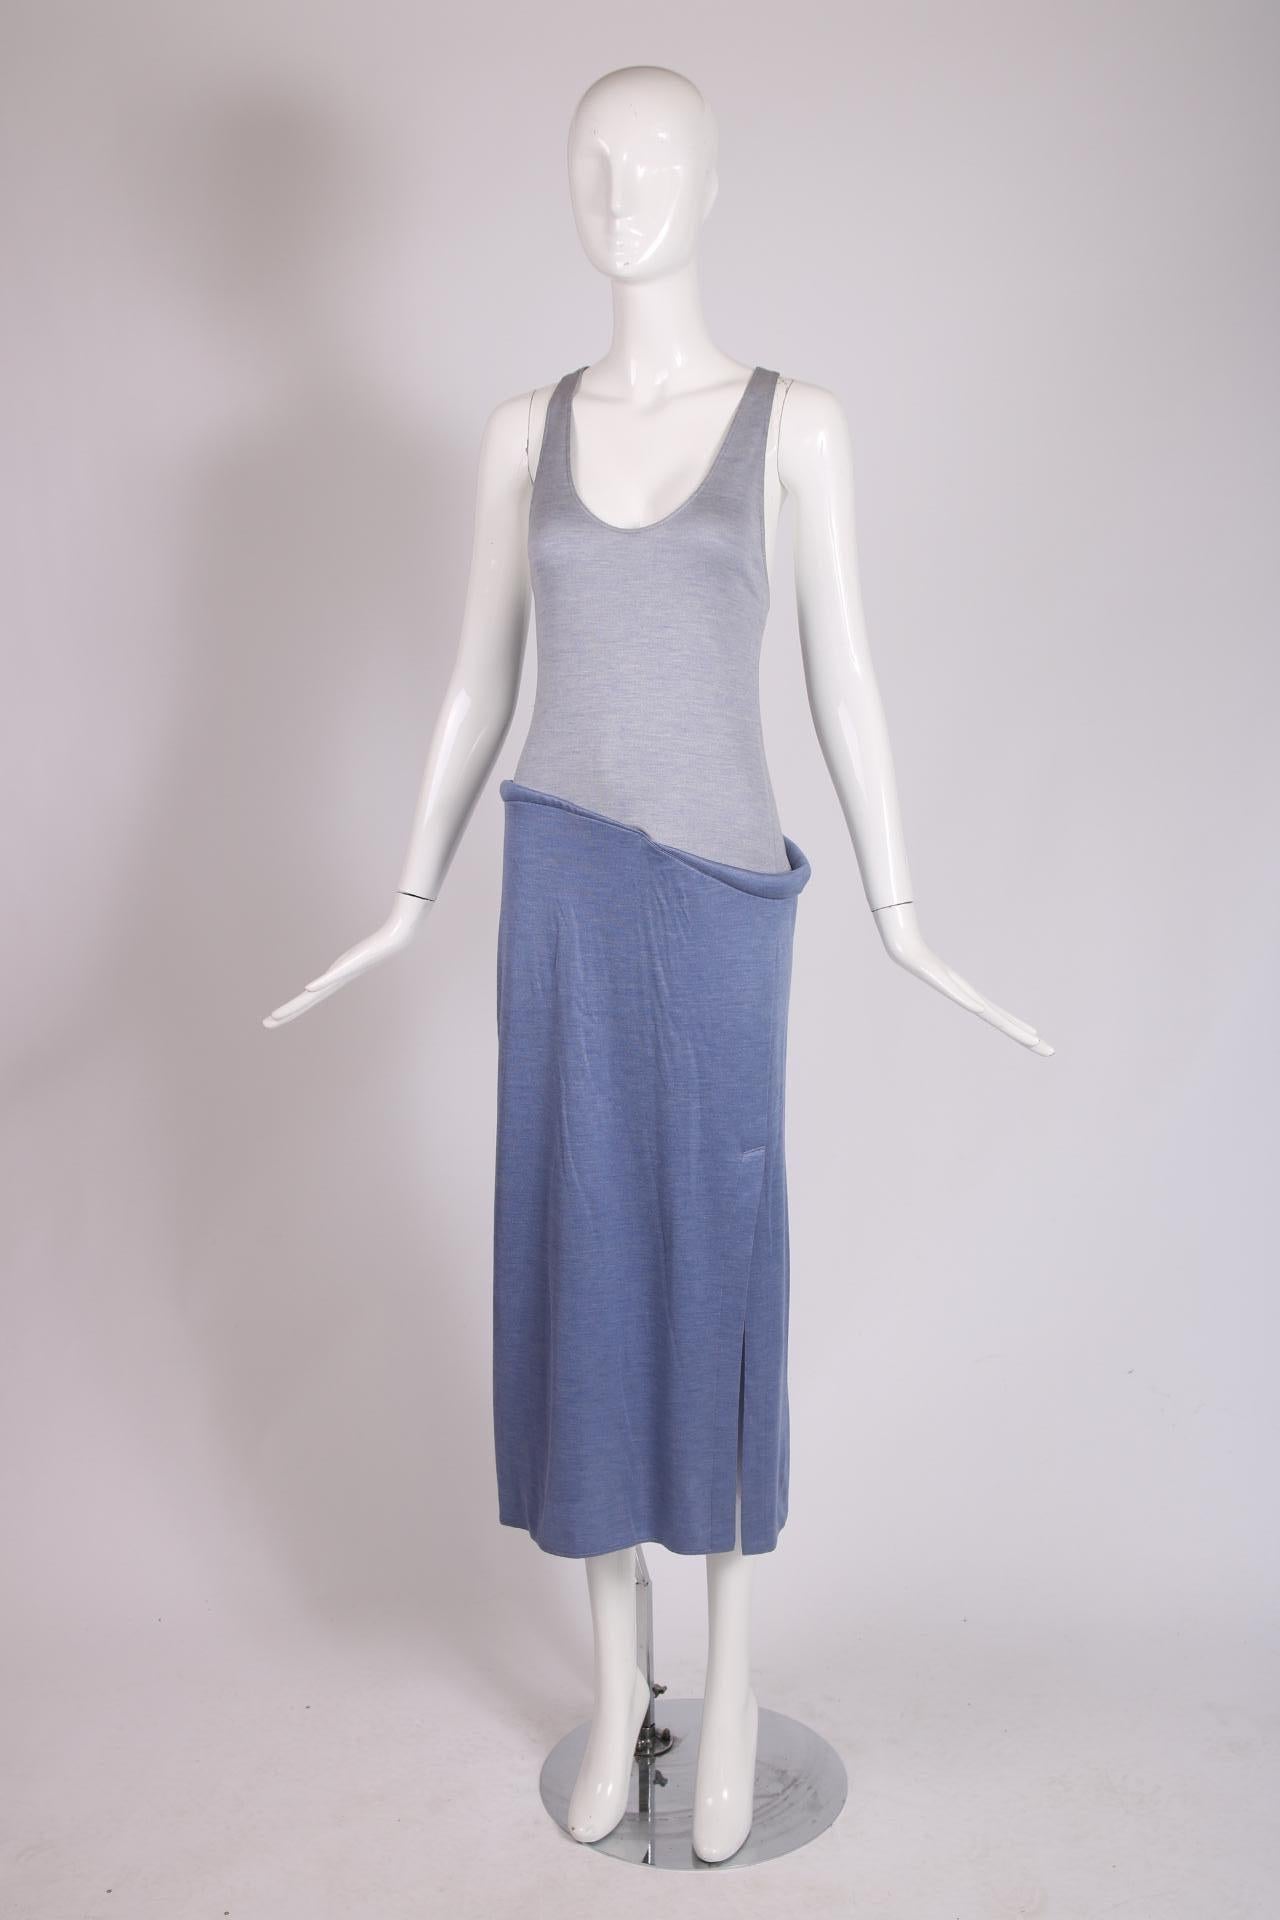 1999 S/S Geoffrey Beene lilac and purple silk jersey dress with a racer back bodice, soft sculpted padded design detail at the waistline seam and a 17